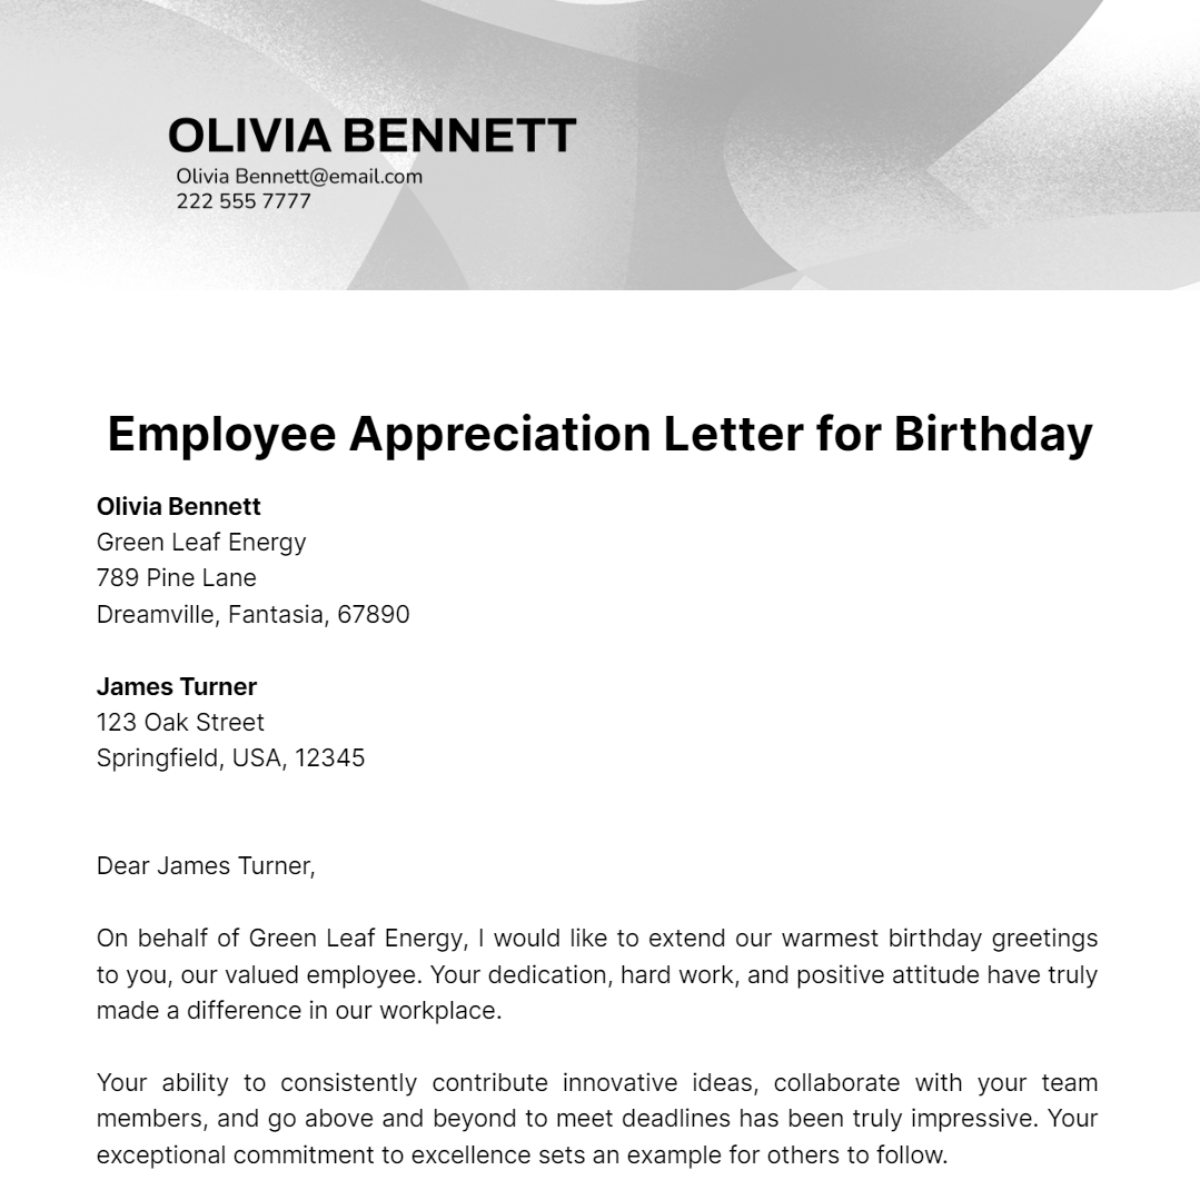 Employee Appreciation Letter for Birthday Template